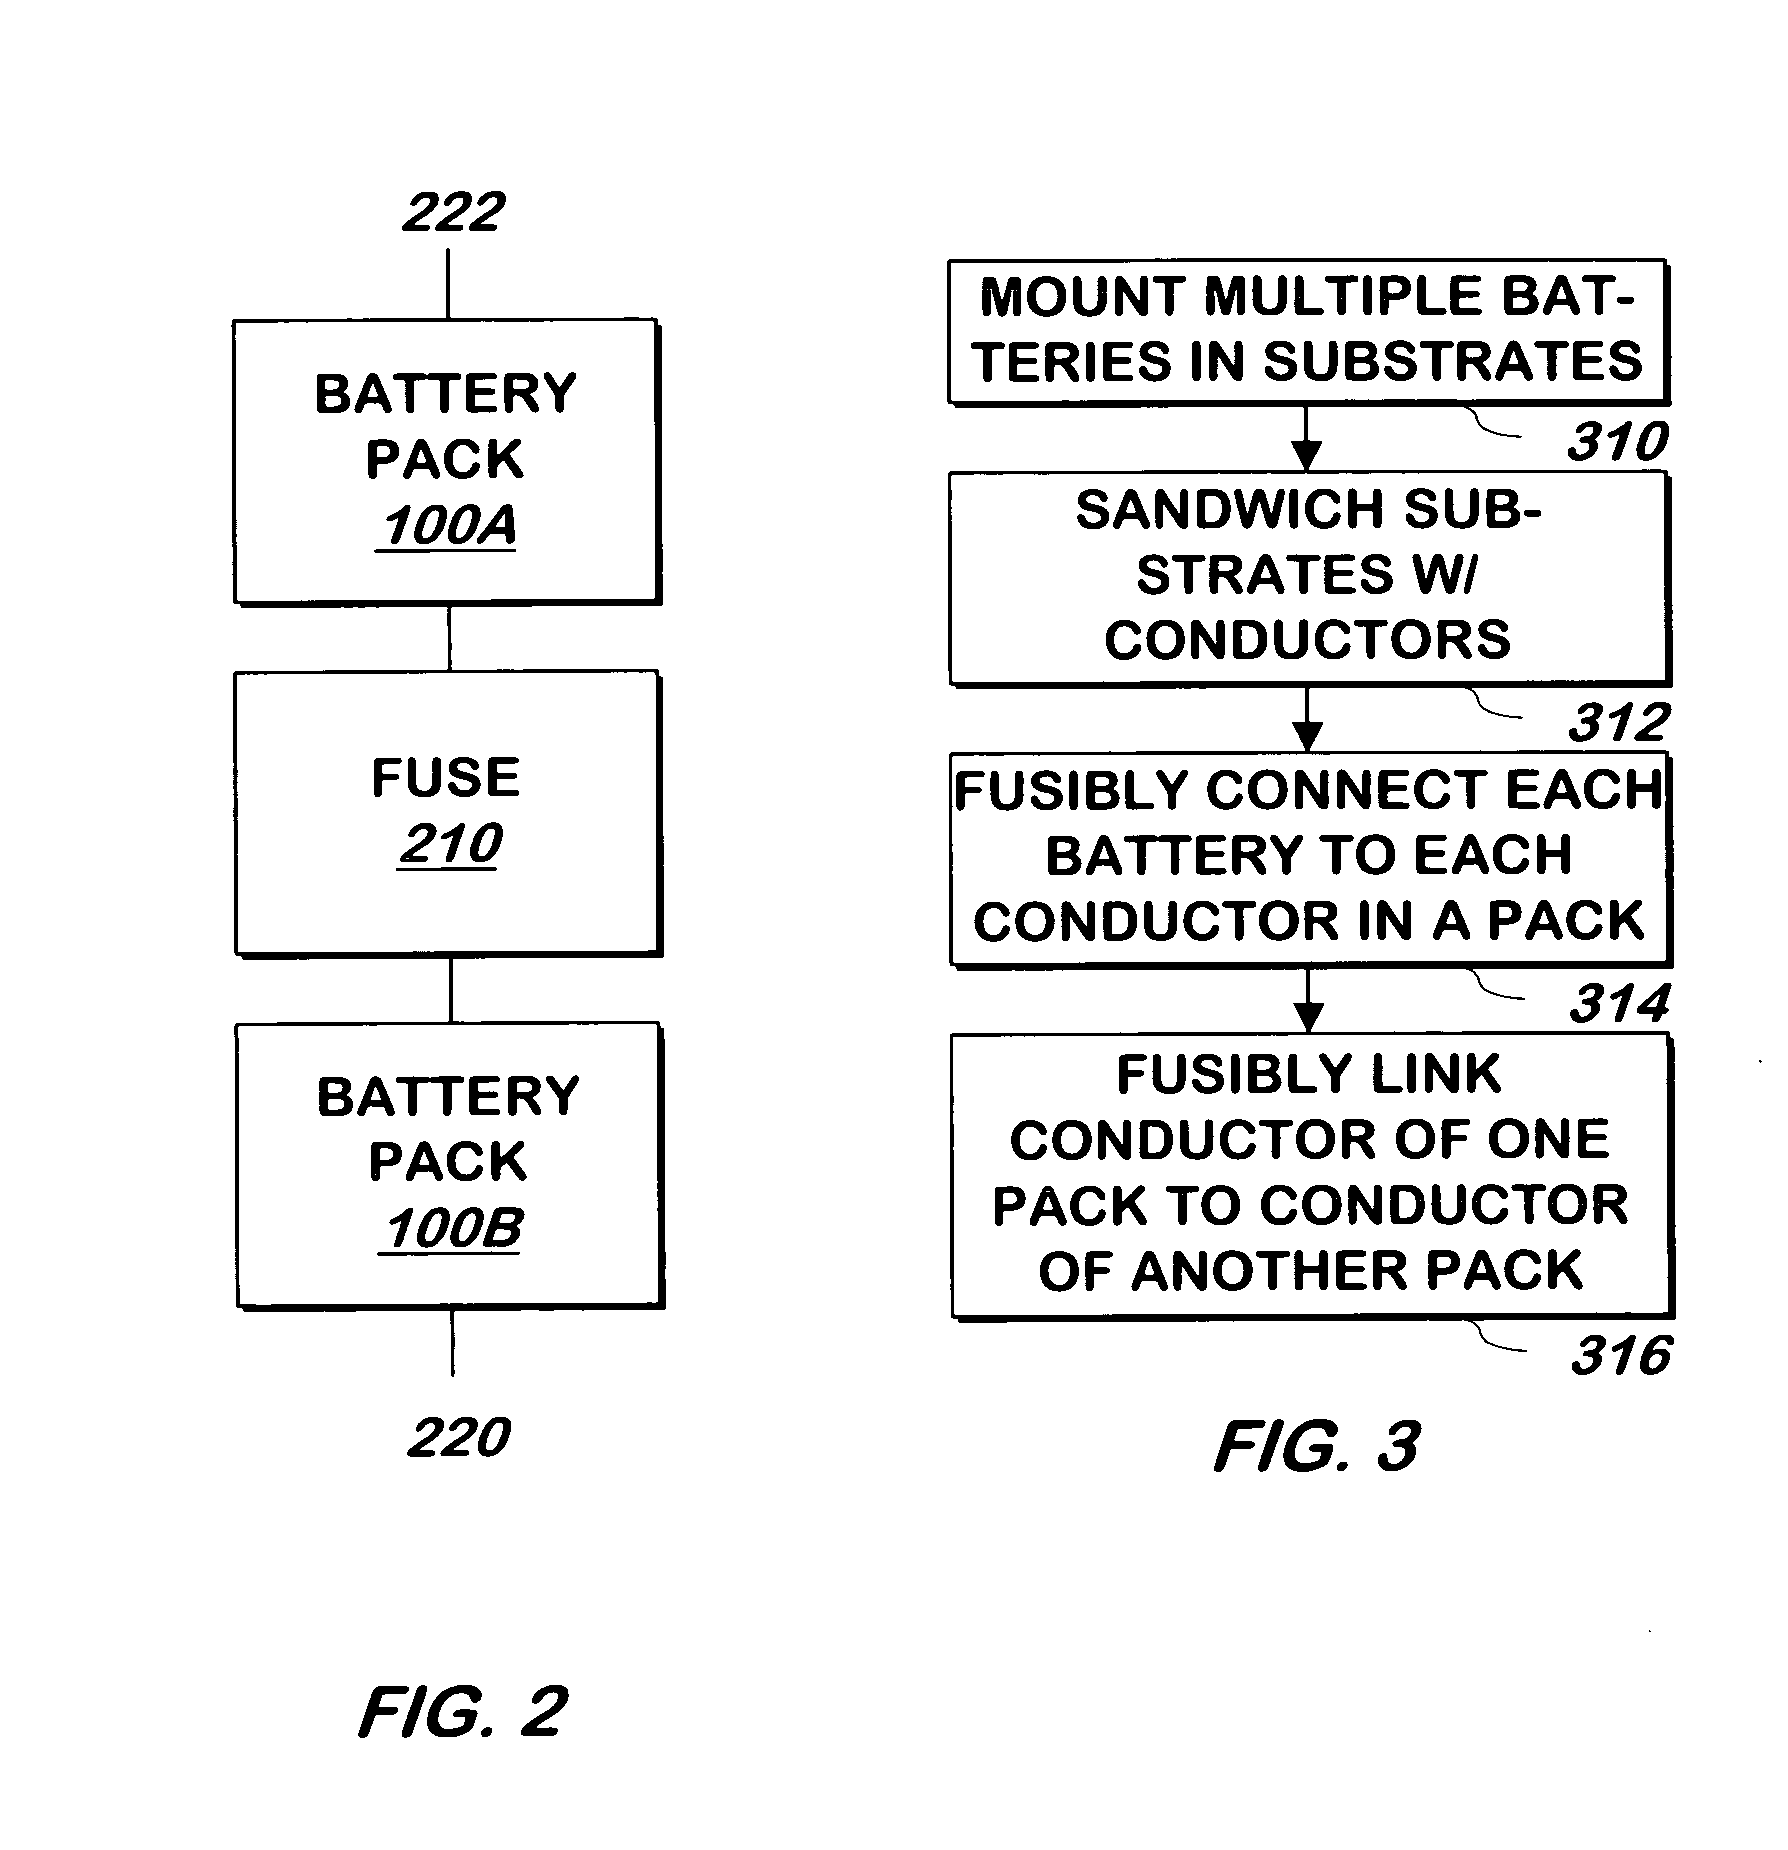 System and method for fusibly linking batteries